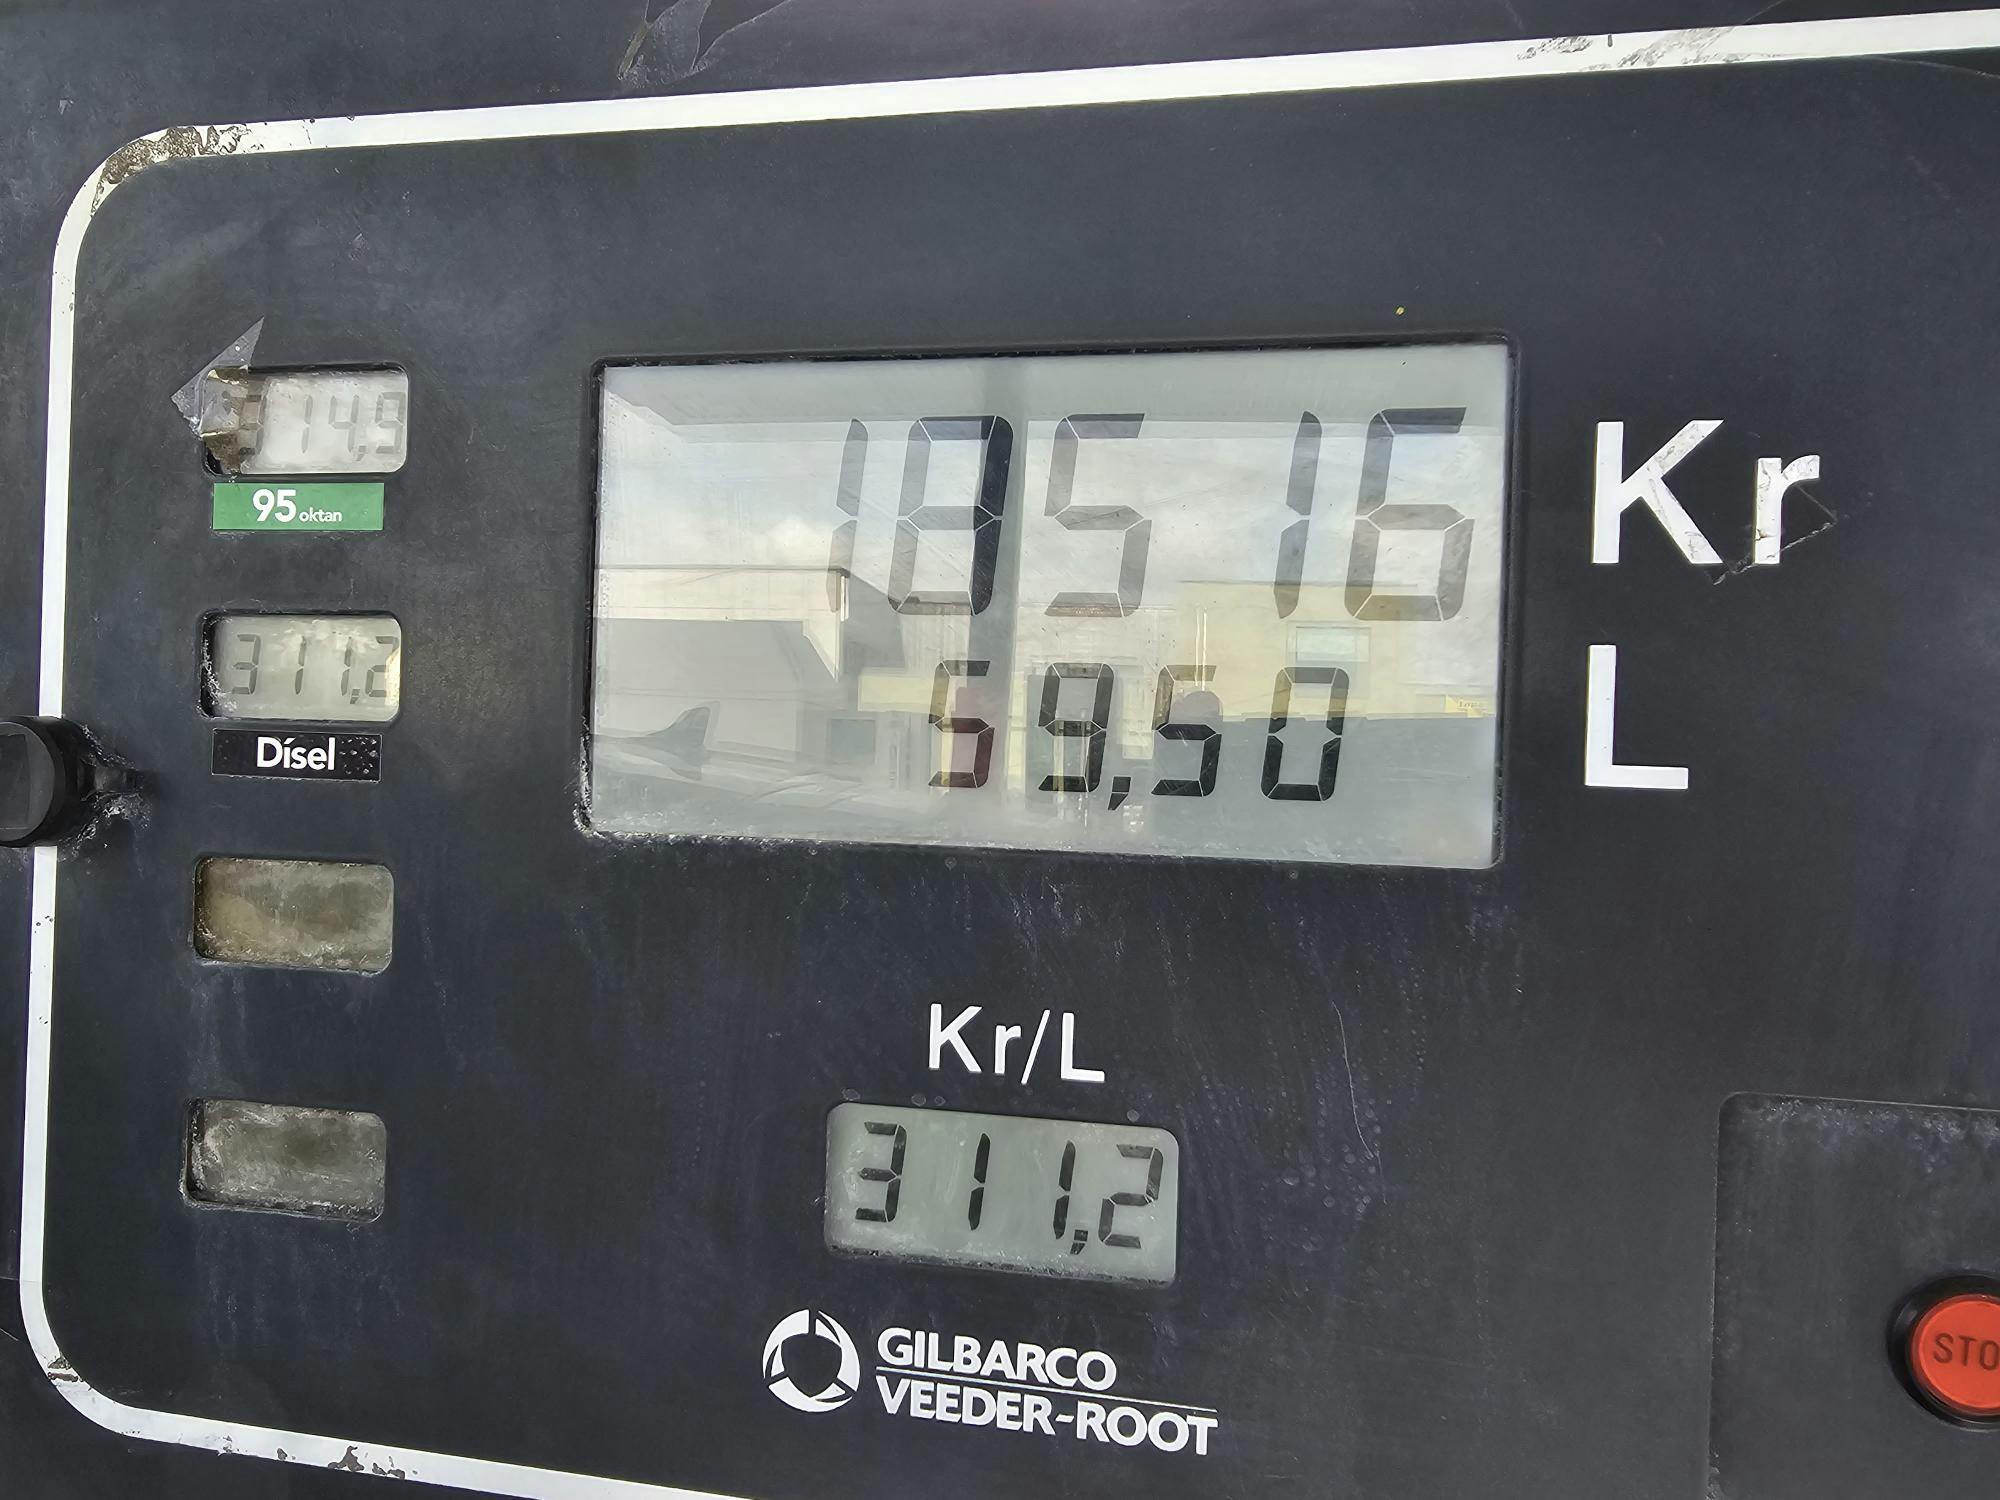 Iceland Expensive gas prices per liter